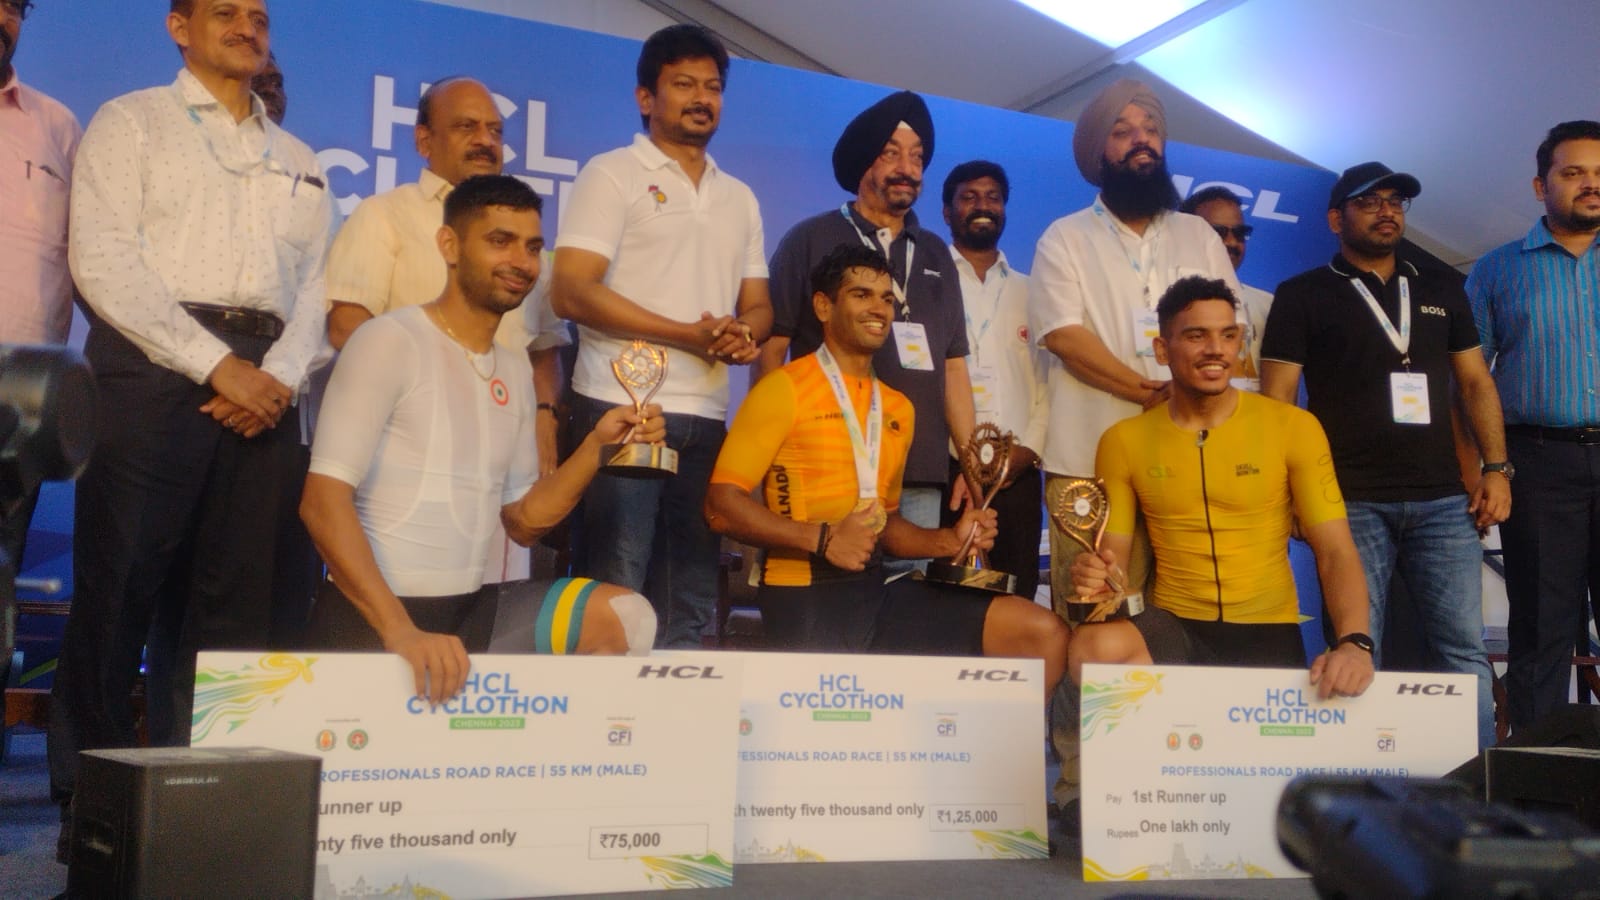 HCL CyclothonSuccessfully Concludes in Chennai with Over1100 Cyclists